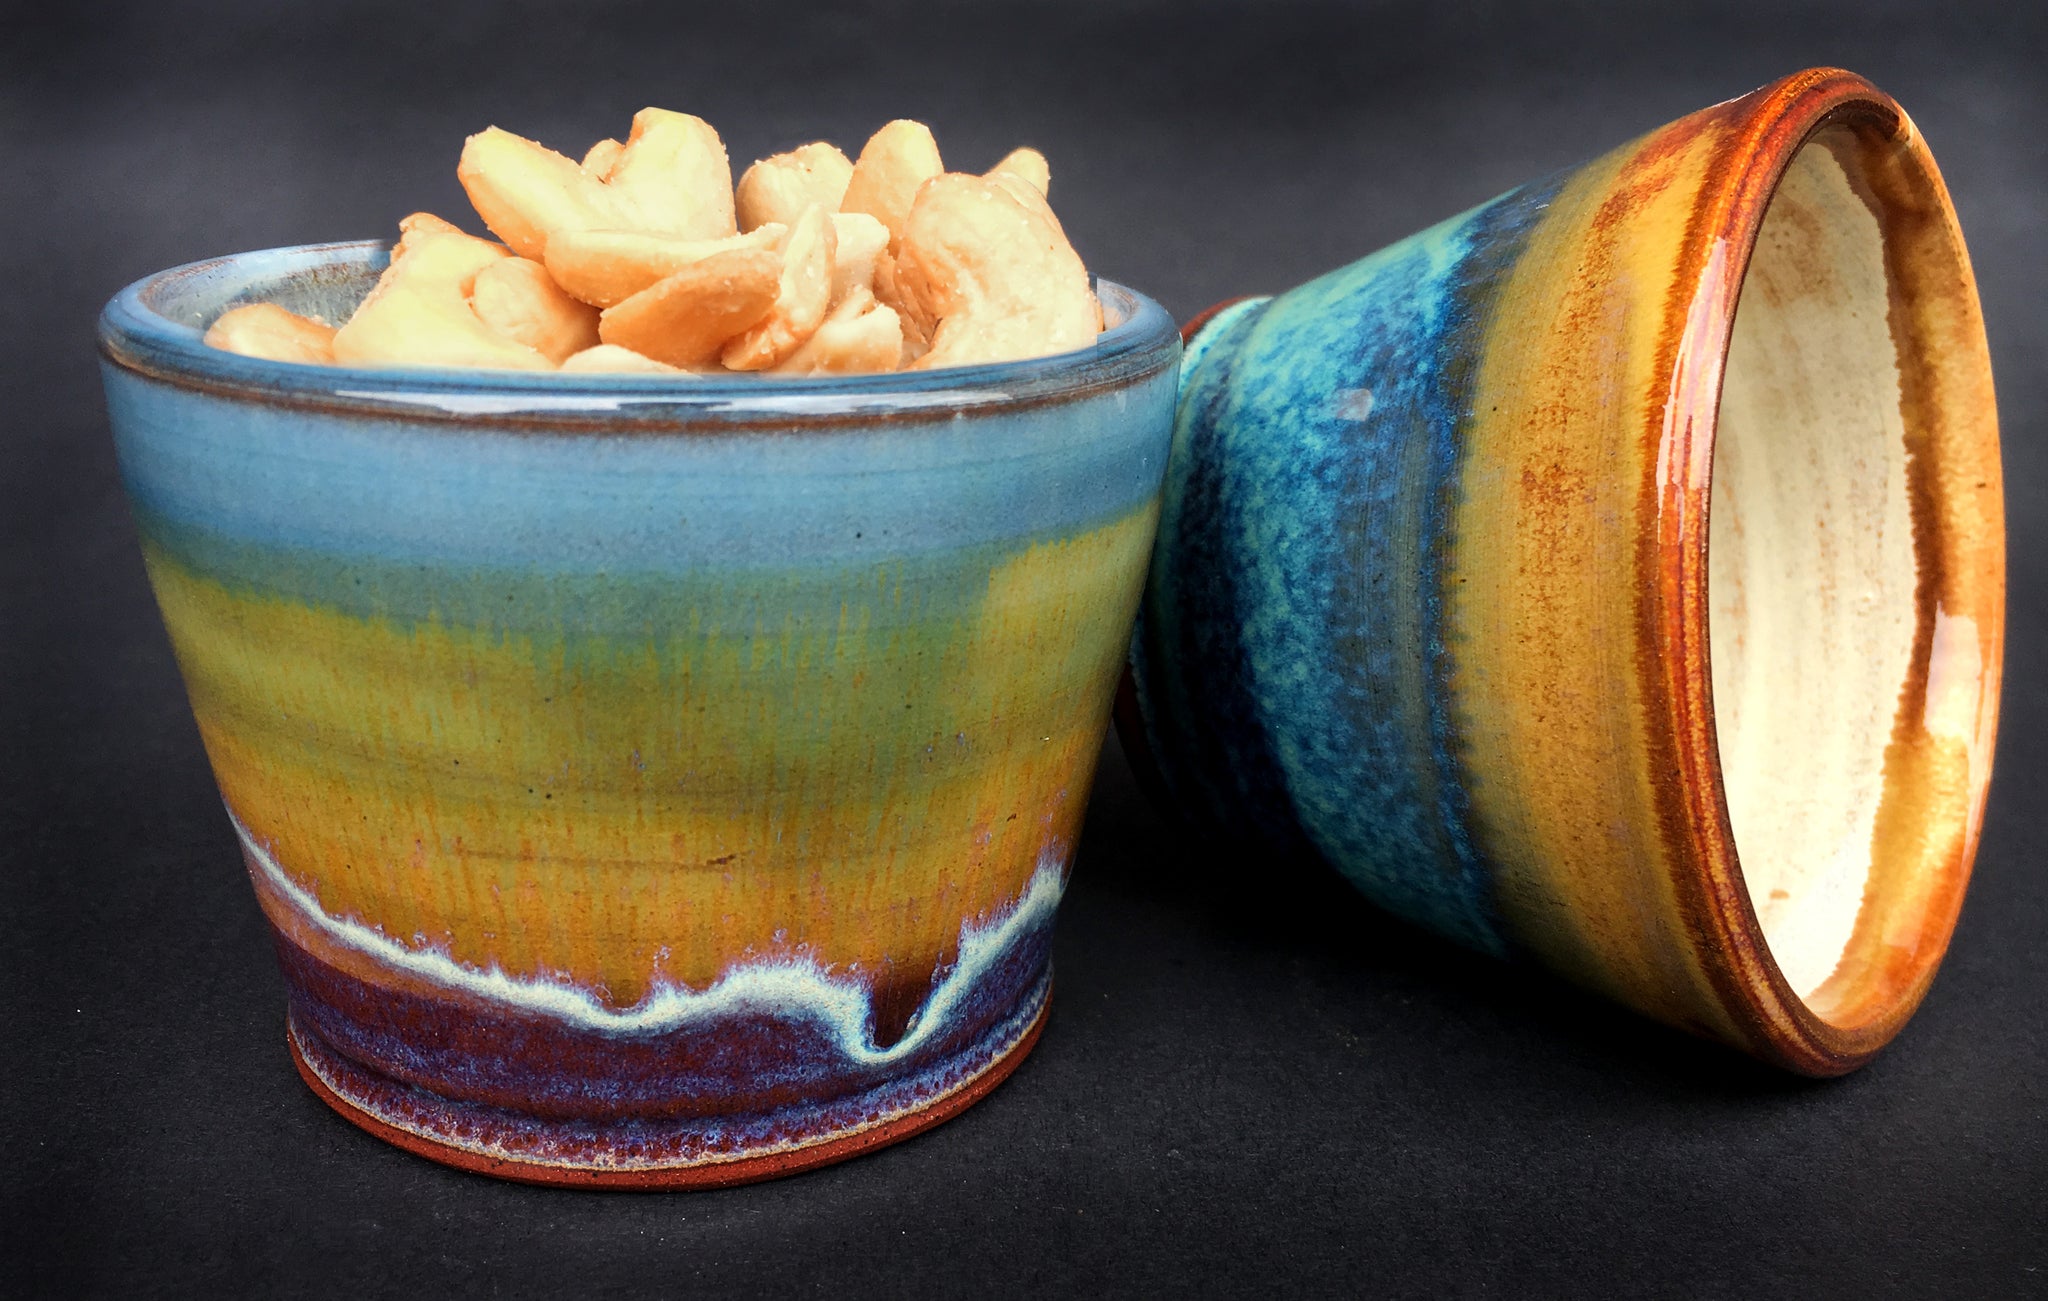 The Pair of Snack Bowls - Sand Bay & Summer Tide